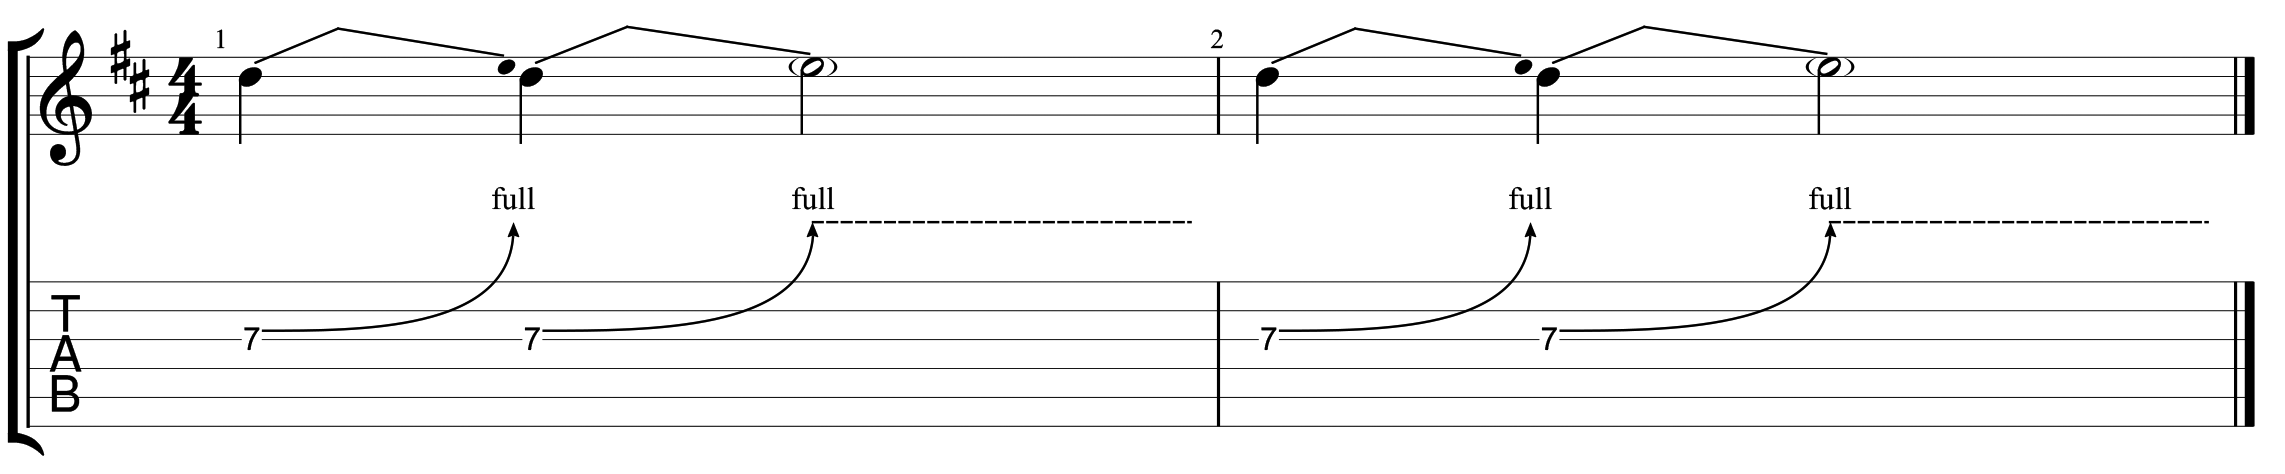 How to read guitar tab 10